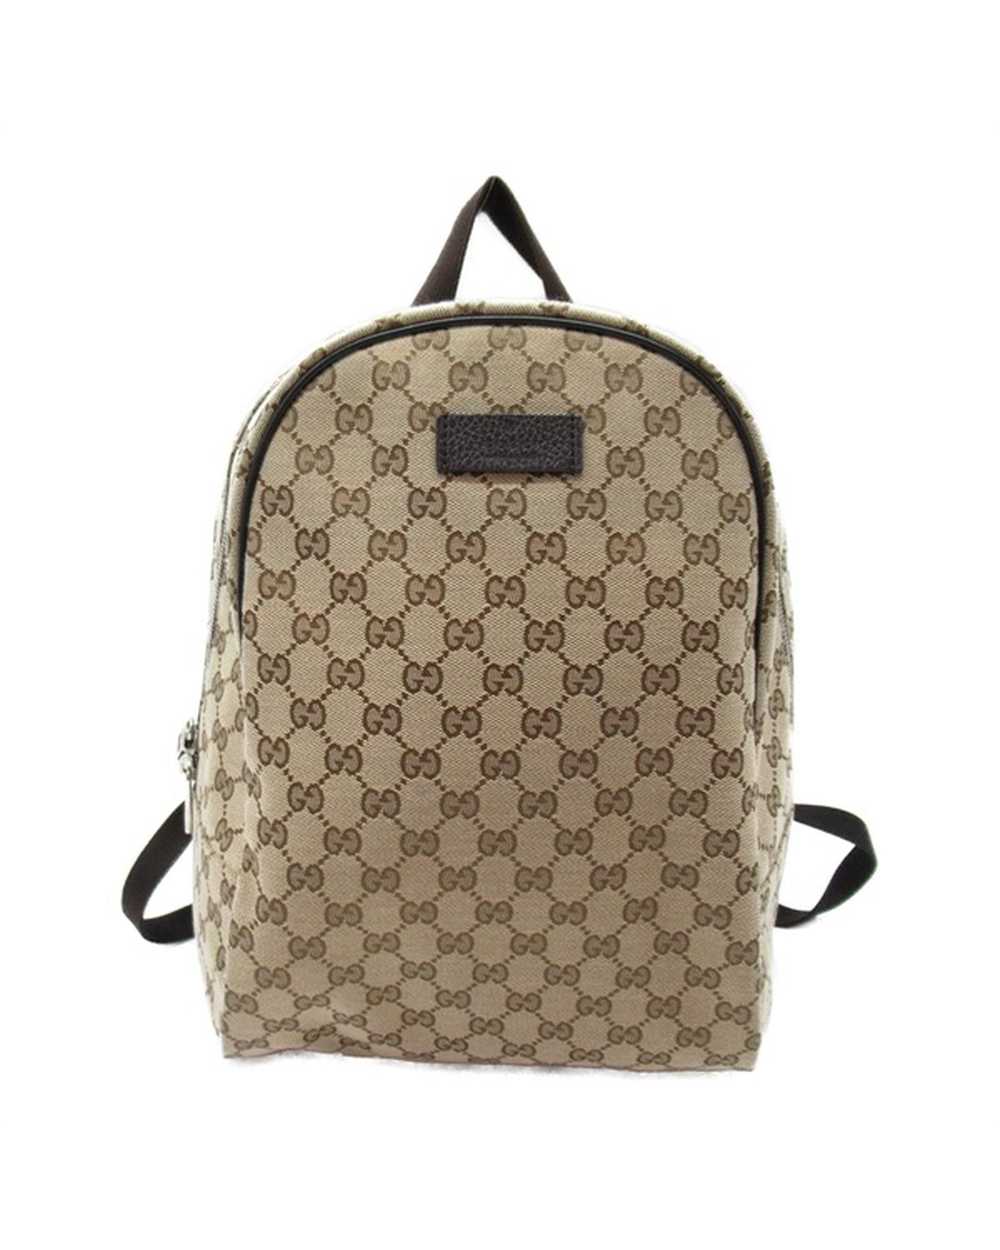 Gucci Canvas Backpack in Brown with GG Pattern - … - image 1